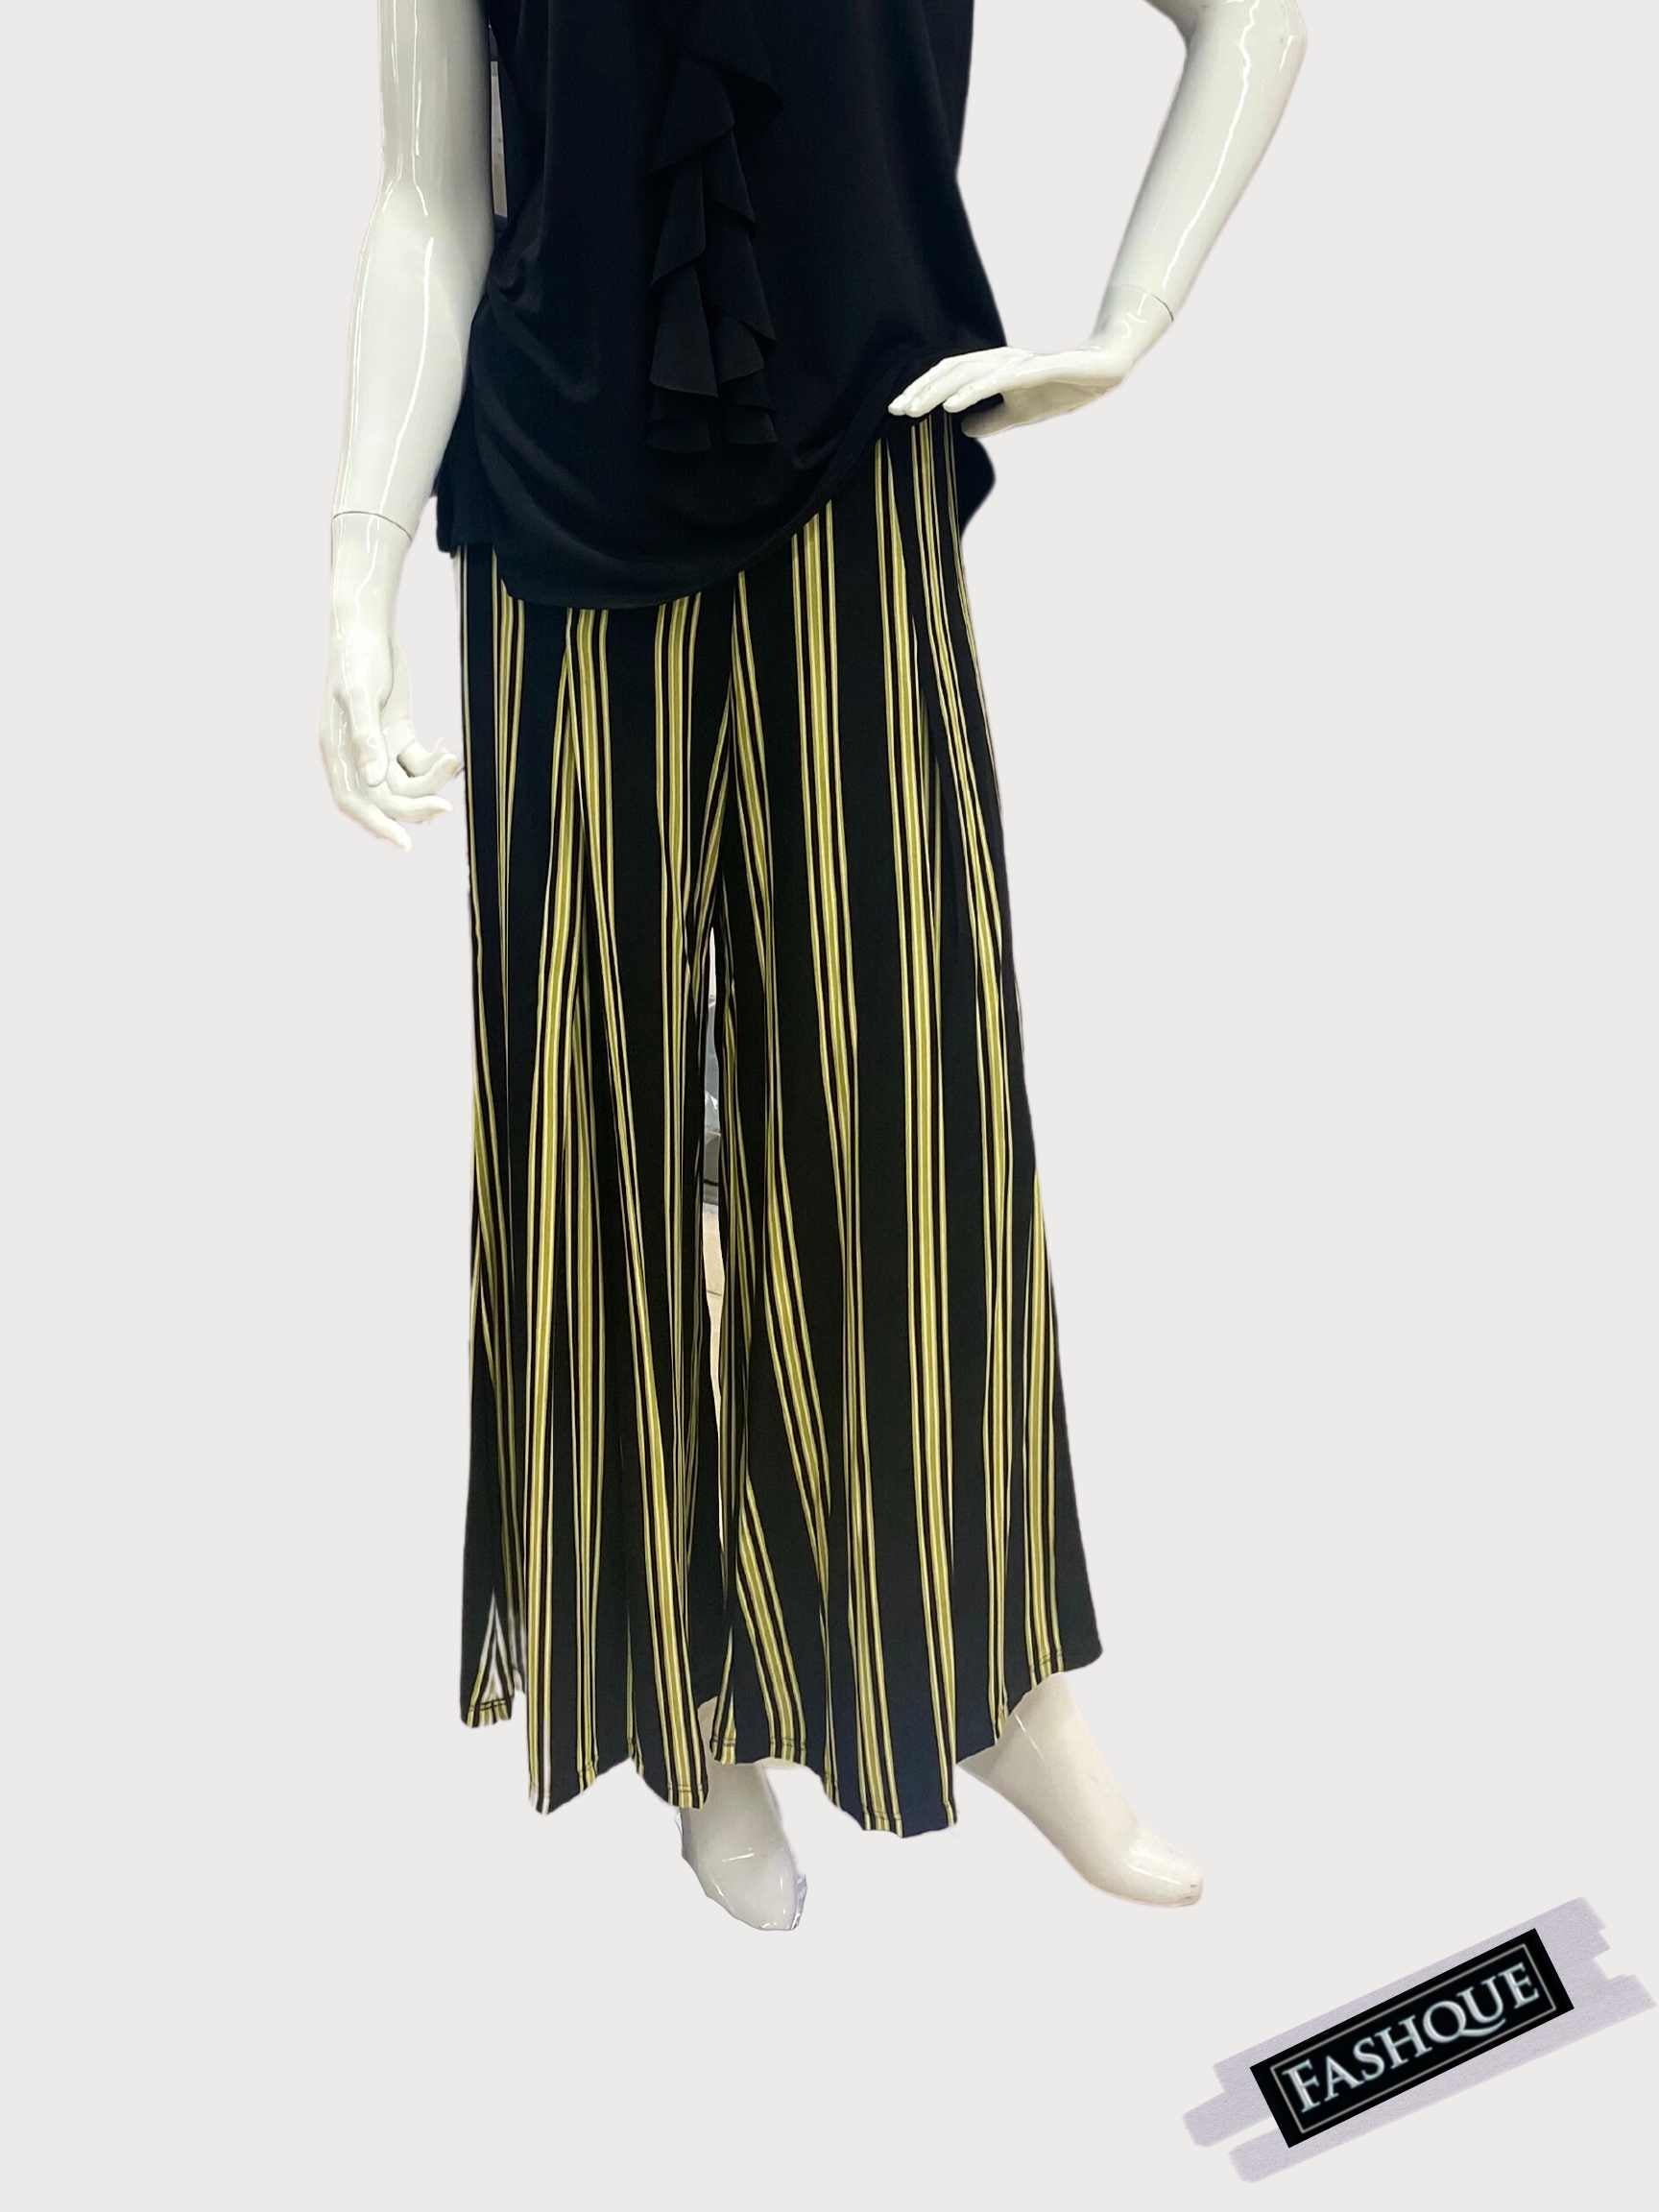 FASHQUE - Pull On Pleated Front Gaucho - P040